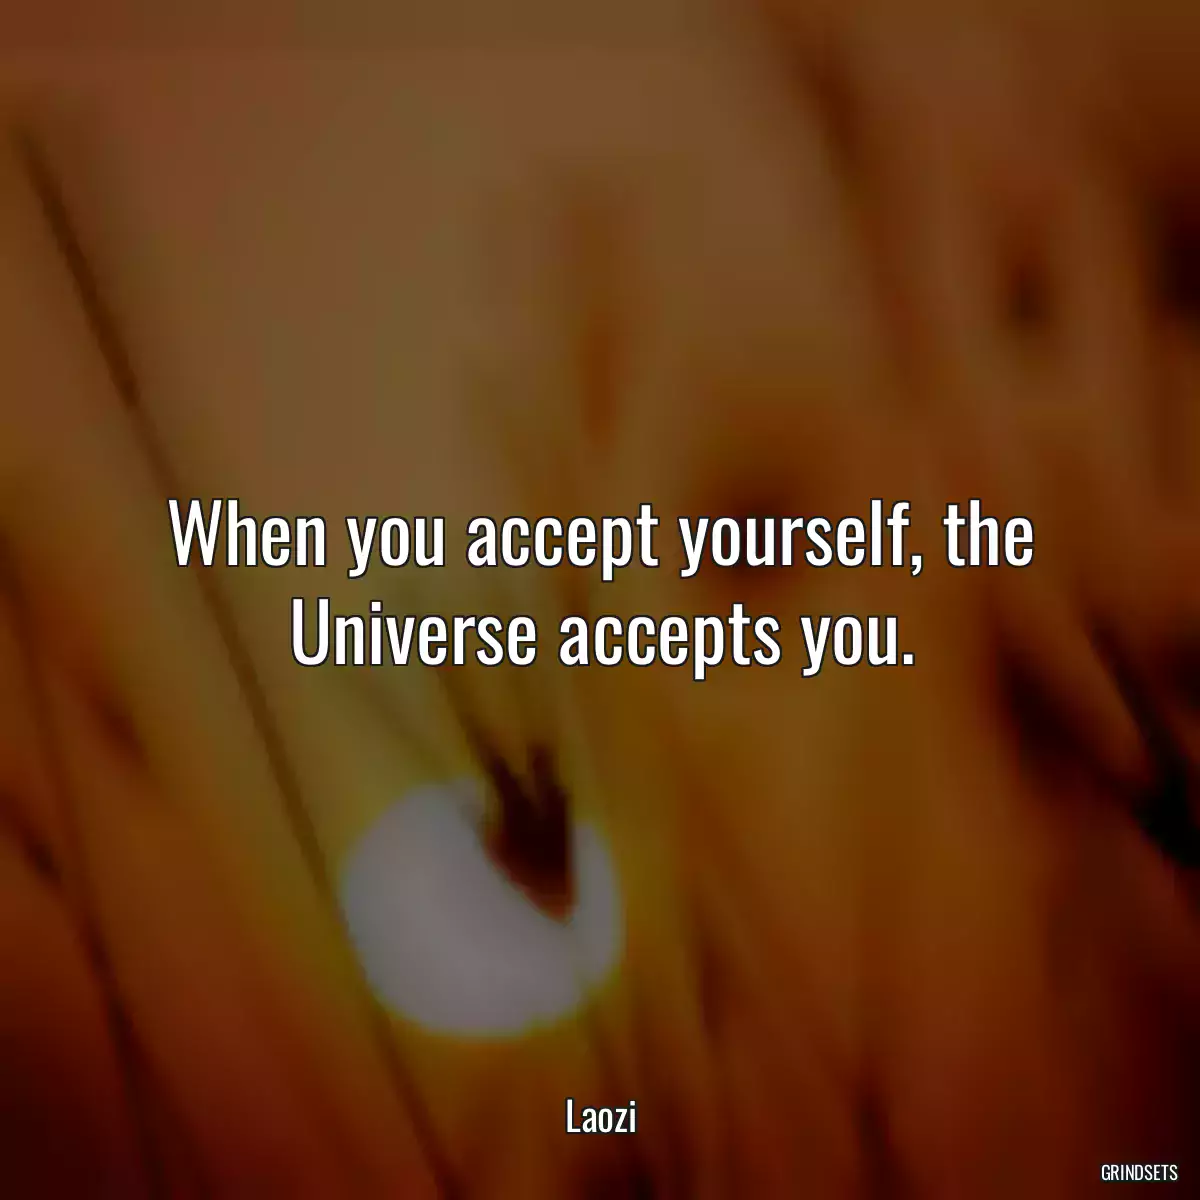 When you accept yourself, the Universe accepts you.